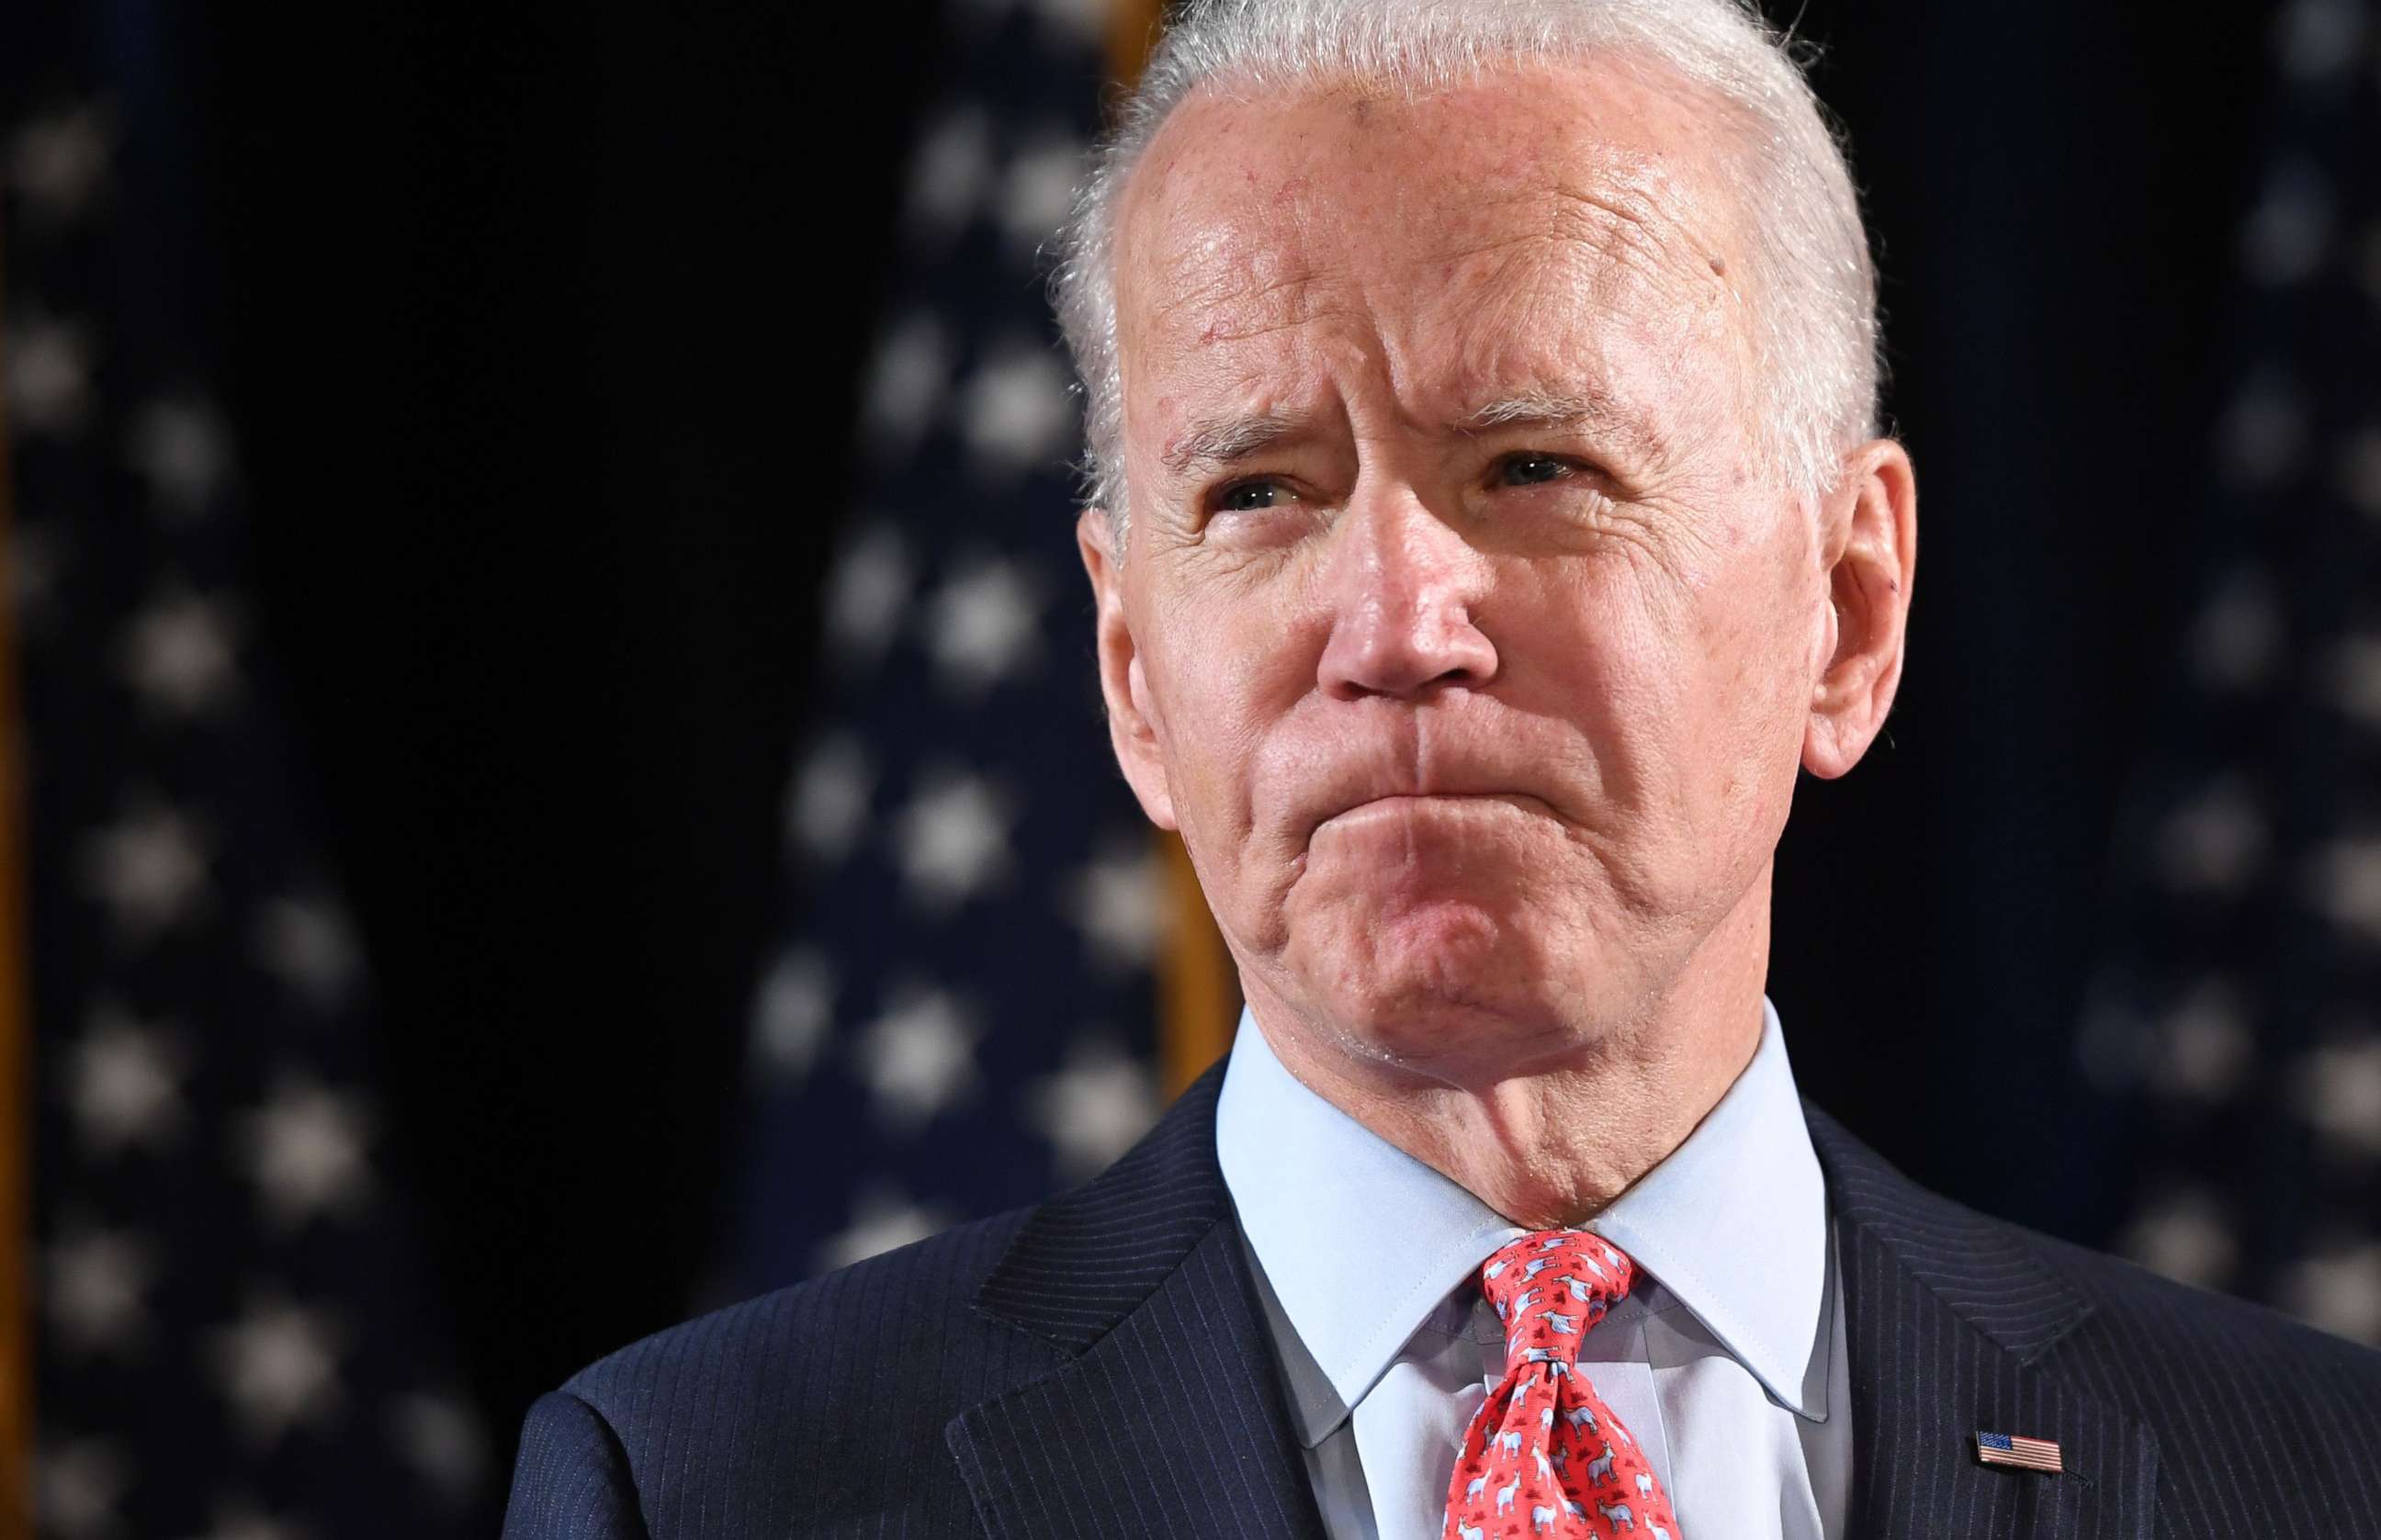 PHOTO: In this file photo taken on March 12, 2020 former vice president and Democratic presidential hopeful Joe Biden speaks about COVID-19 during a press event in Wilmington, Del.